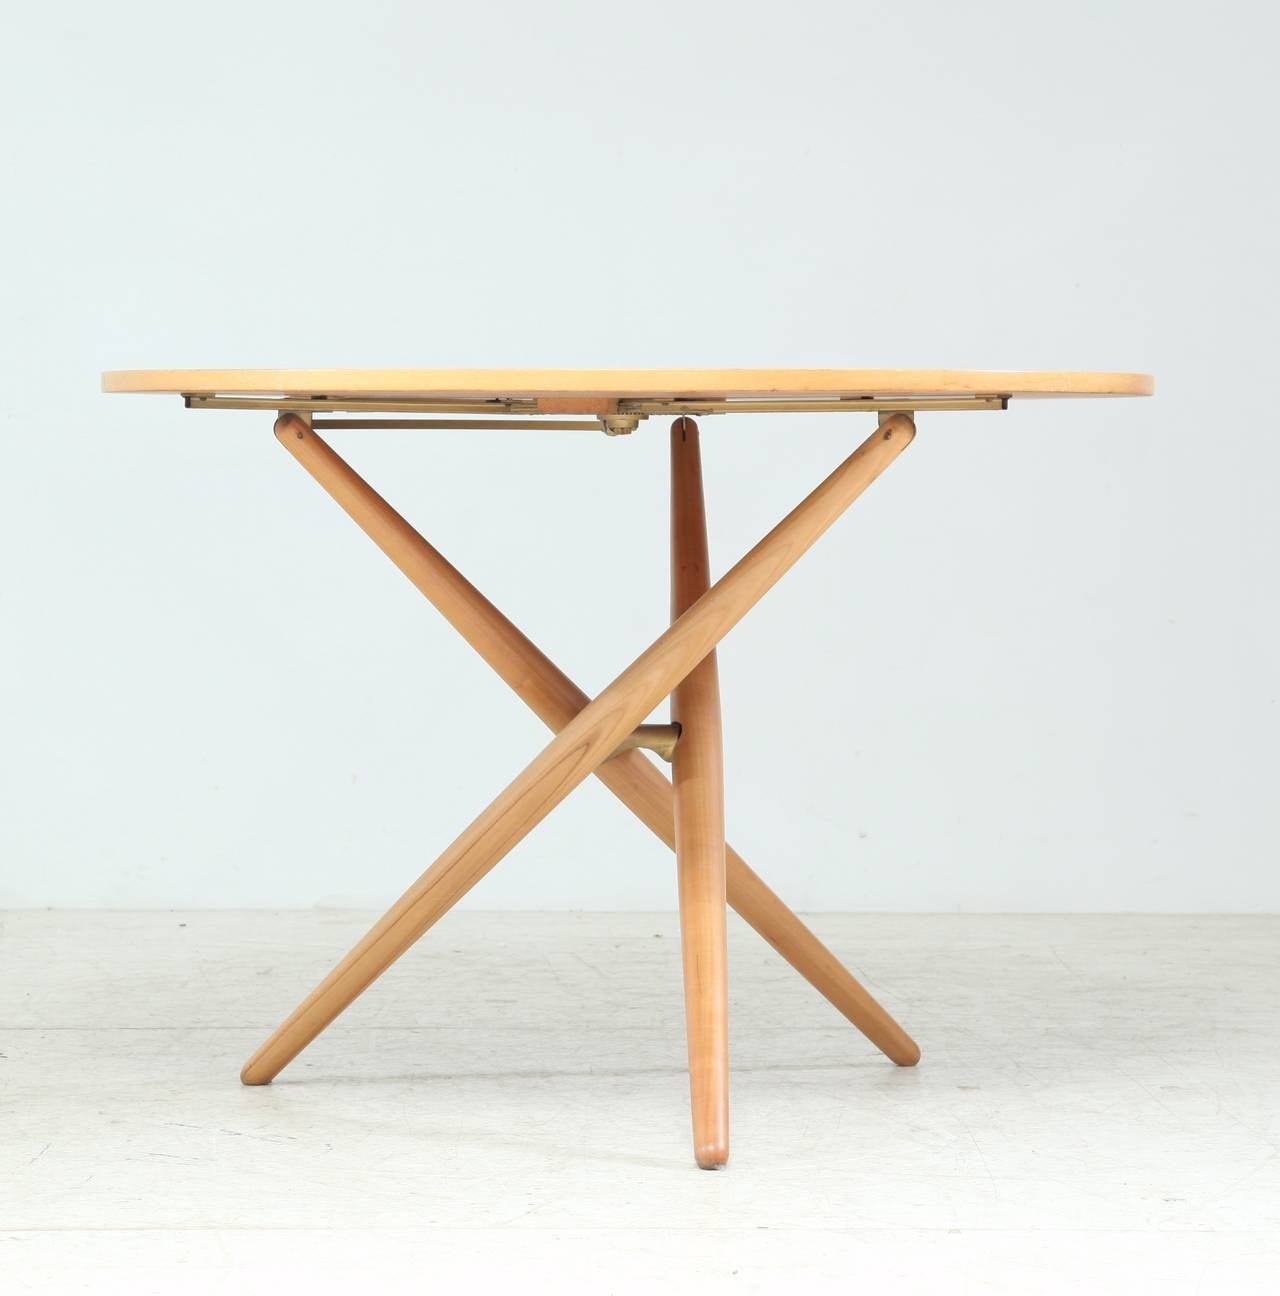 A height adjustable wooden table, designed by Jurg Bally for Wohnhilfe, Switzerland, 1951.
The name of this design was the 'Ess-Tee' (eat-tea) table; a fitting name, as the table can be placed at different heights with an ingenious mechanism, to